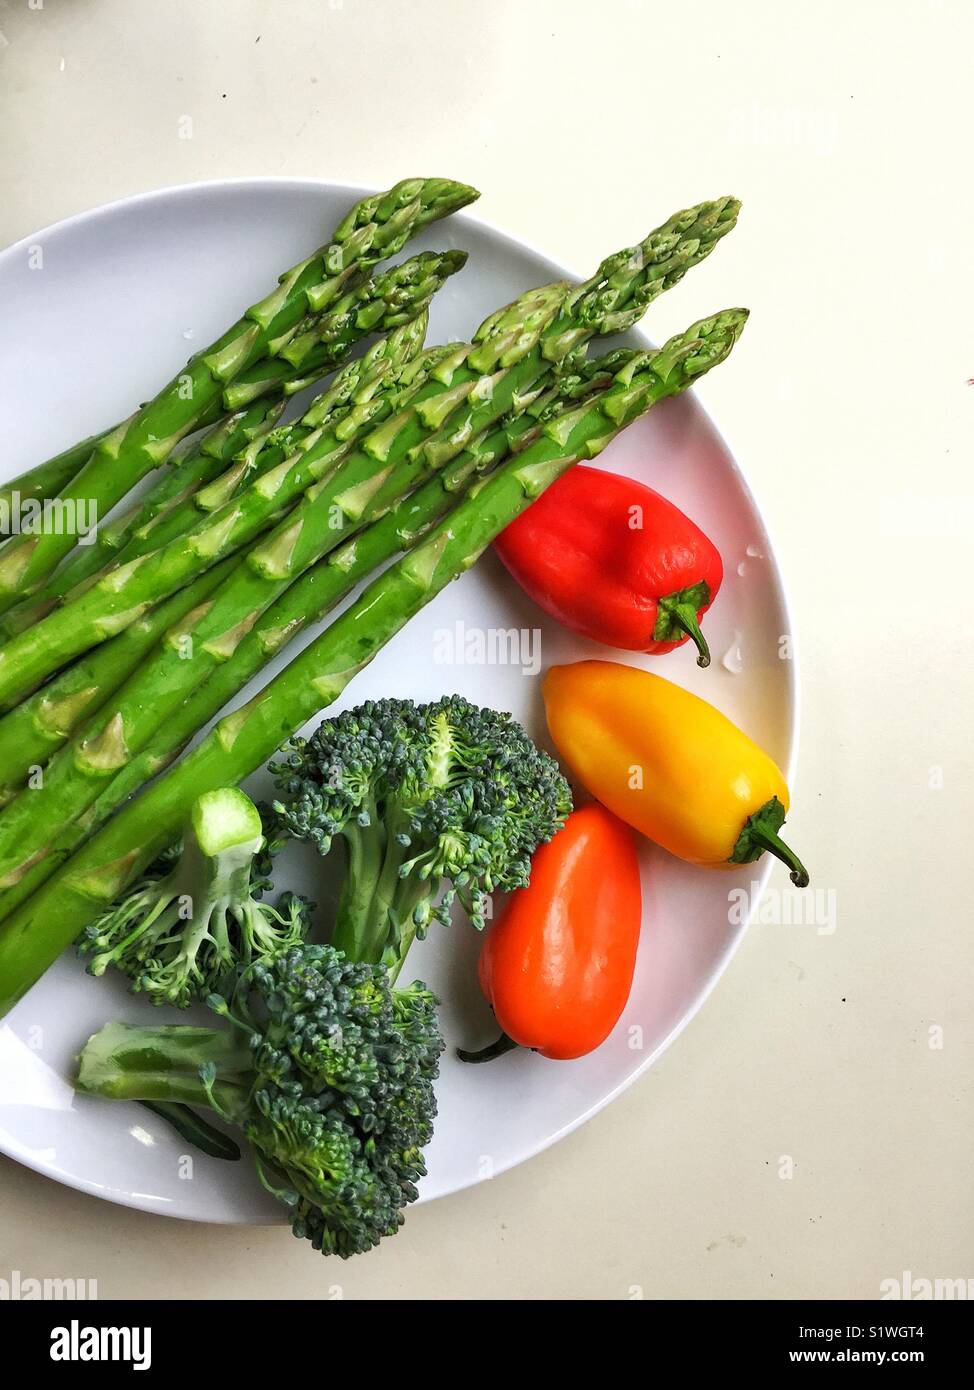 Healthy colorful veggies on white plate Stock Photo